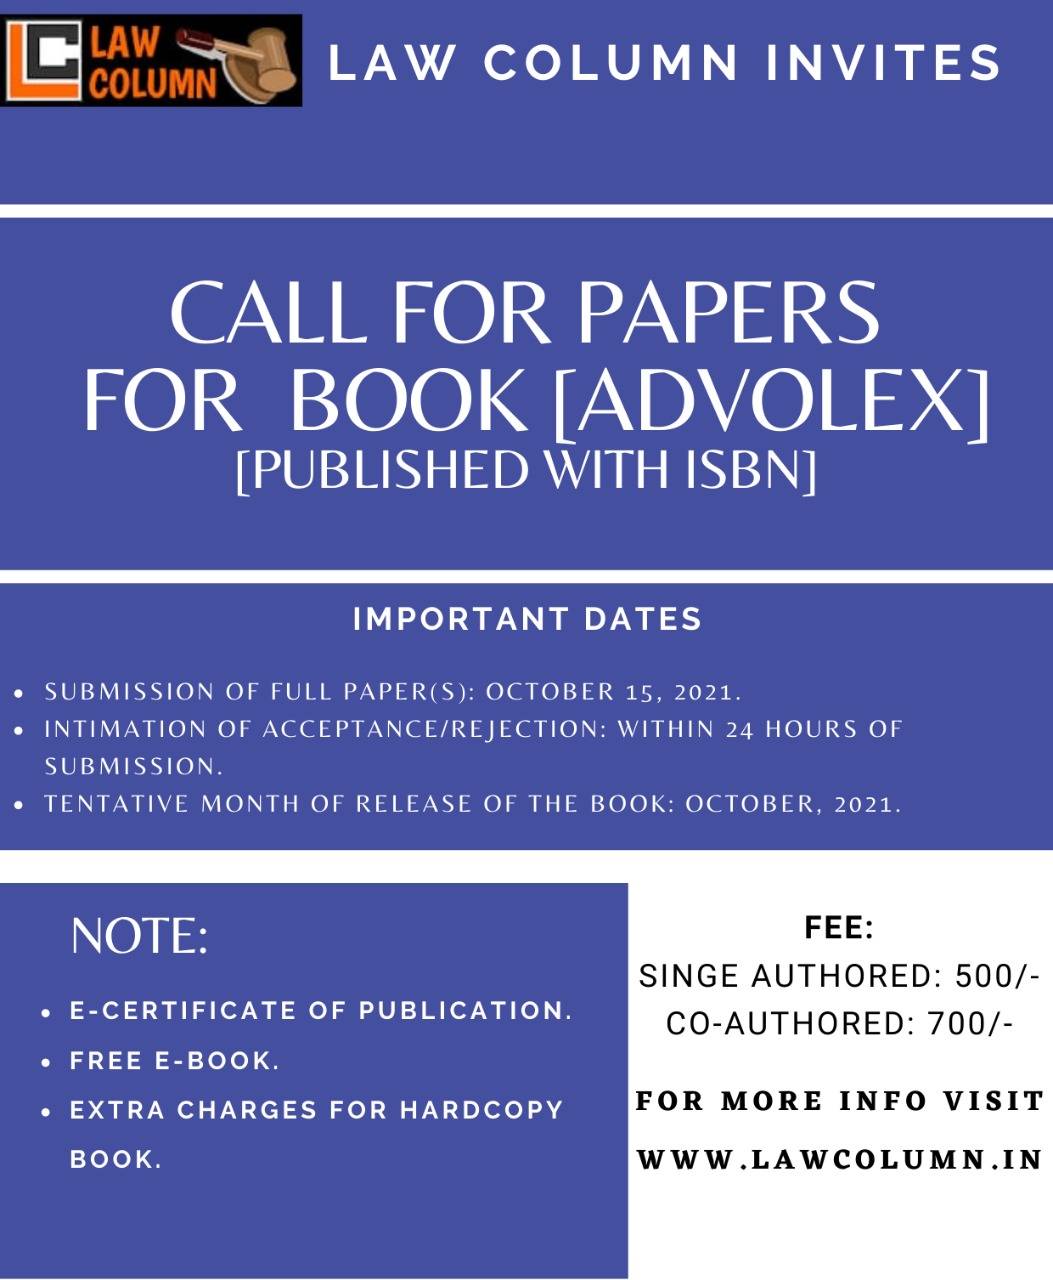 Call For Papers for book ‘AdvoLex by Law Column’ Published with Isbn : Submit By October 15, 2021